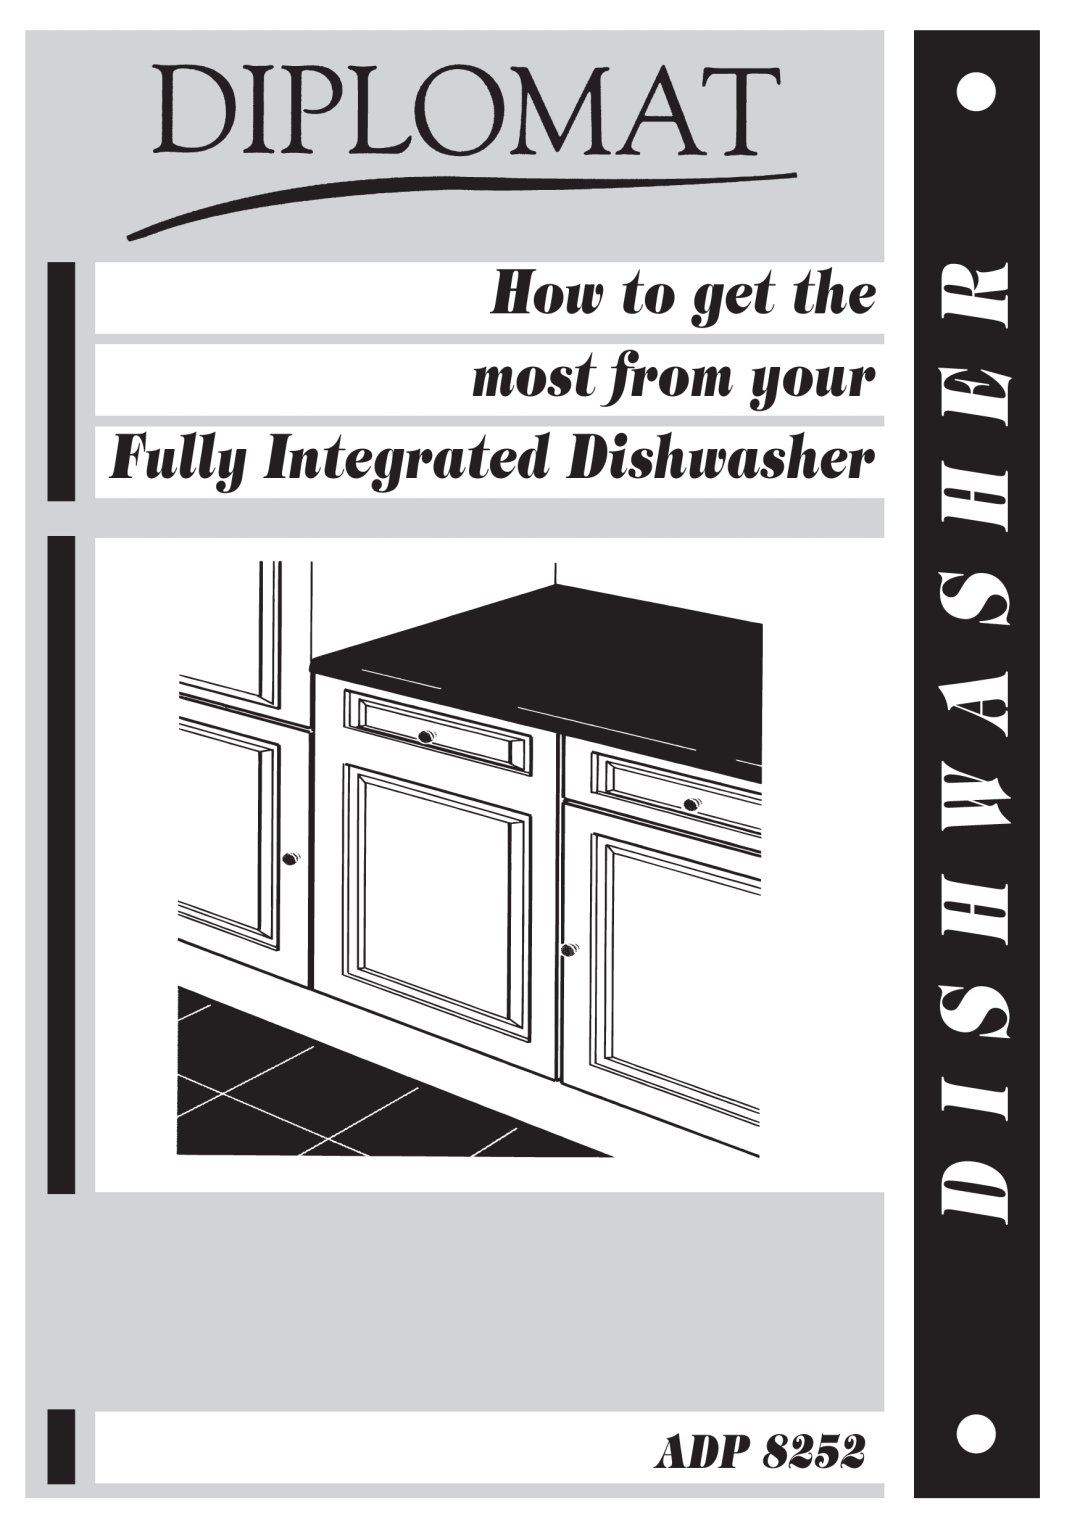 Smeg ADP8252 manual D I S H W A S H E R, How to get the most from your, Fully Integrated Dishwasher 